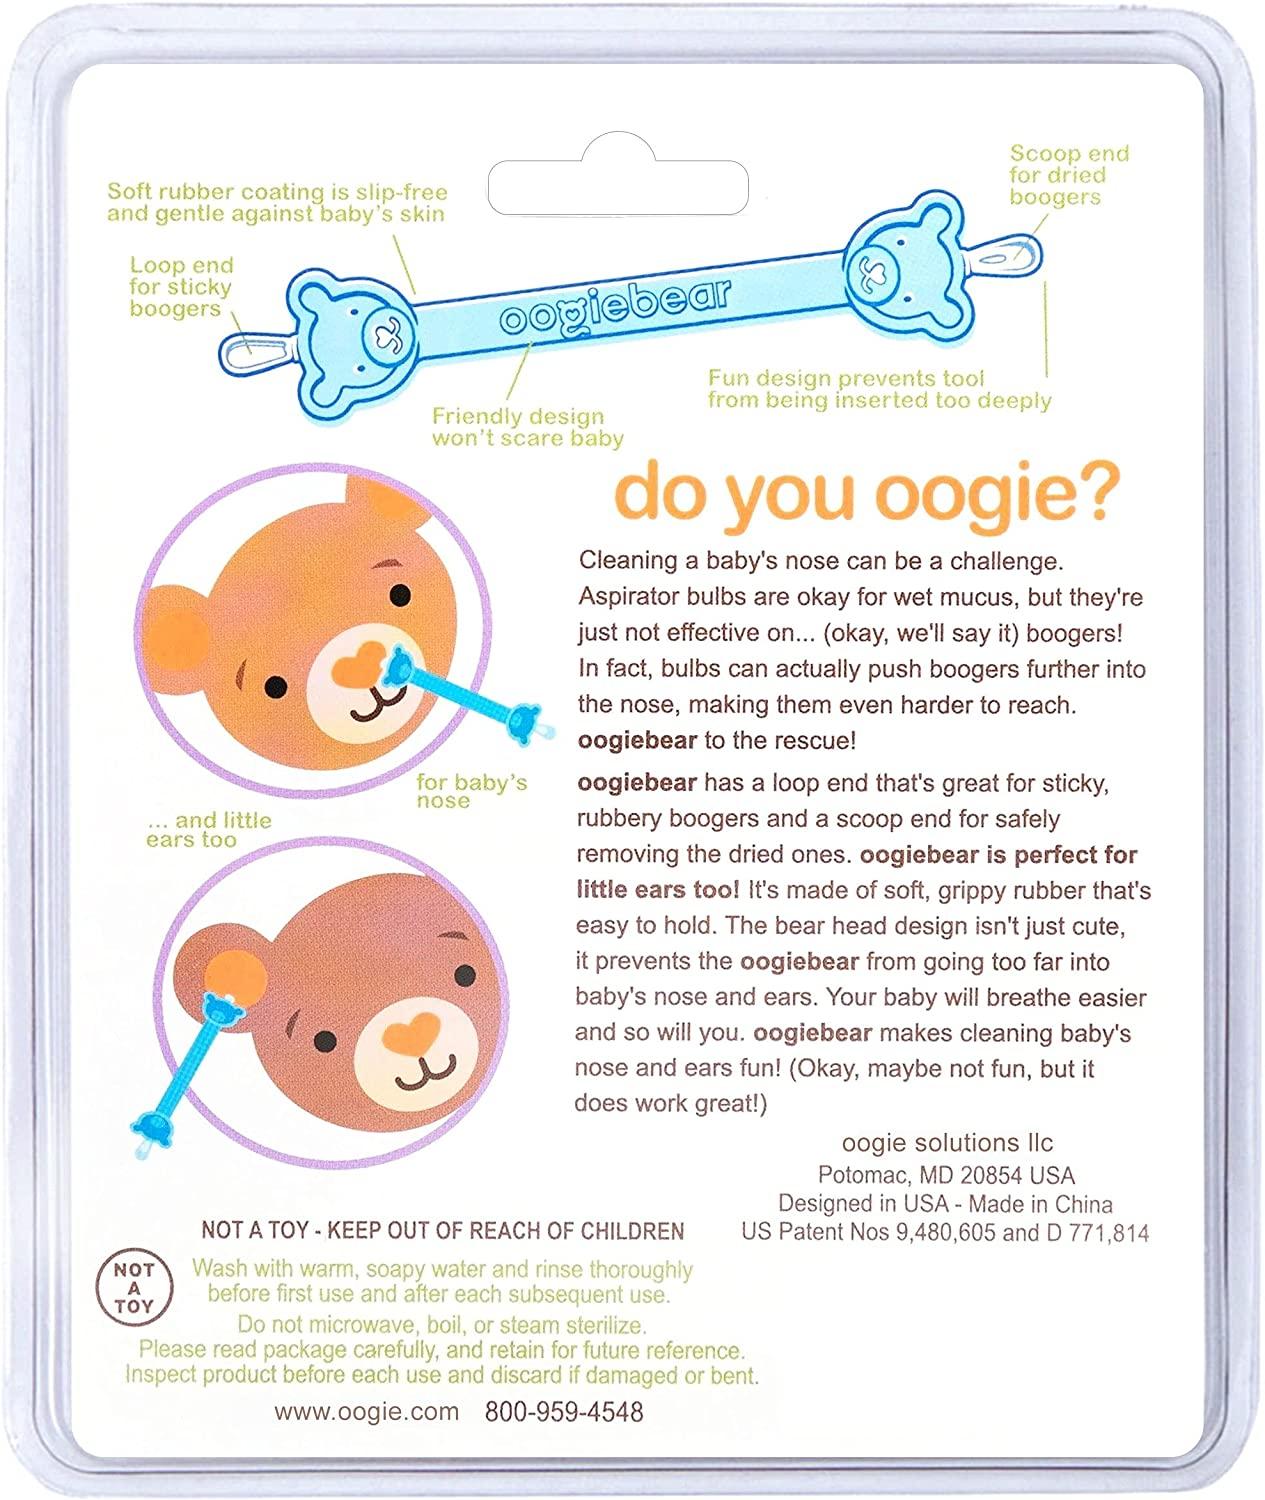 oogiebear - The Safe Baby Nasal Booger and Ear Cleaner - Baby Shower  Registry Essential, Easy Baby Nose Cleaner Gadget for Infants and Toddlers